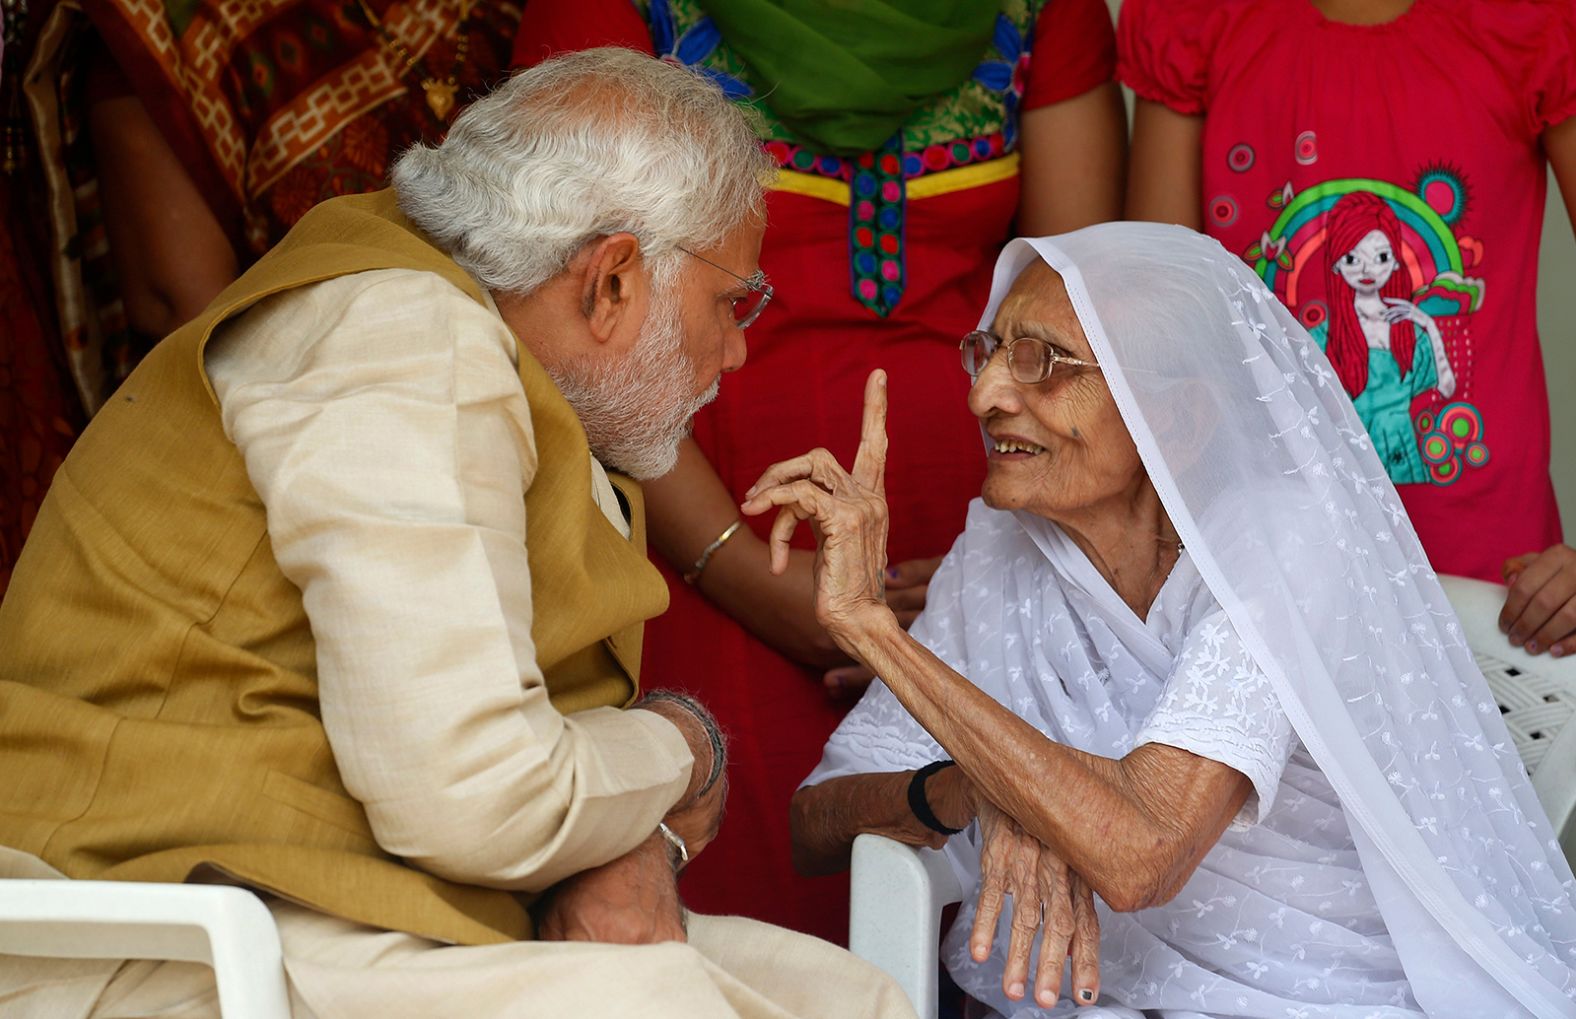 Modi seeks blessings from his 90-year-old mother, Hiraben, after preliminary results showed his party winning by a landslide, on May 16, 2014. 